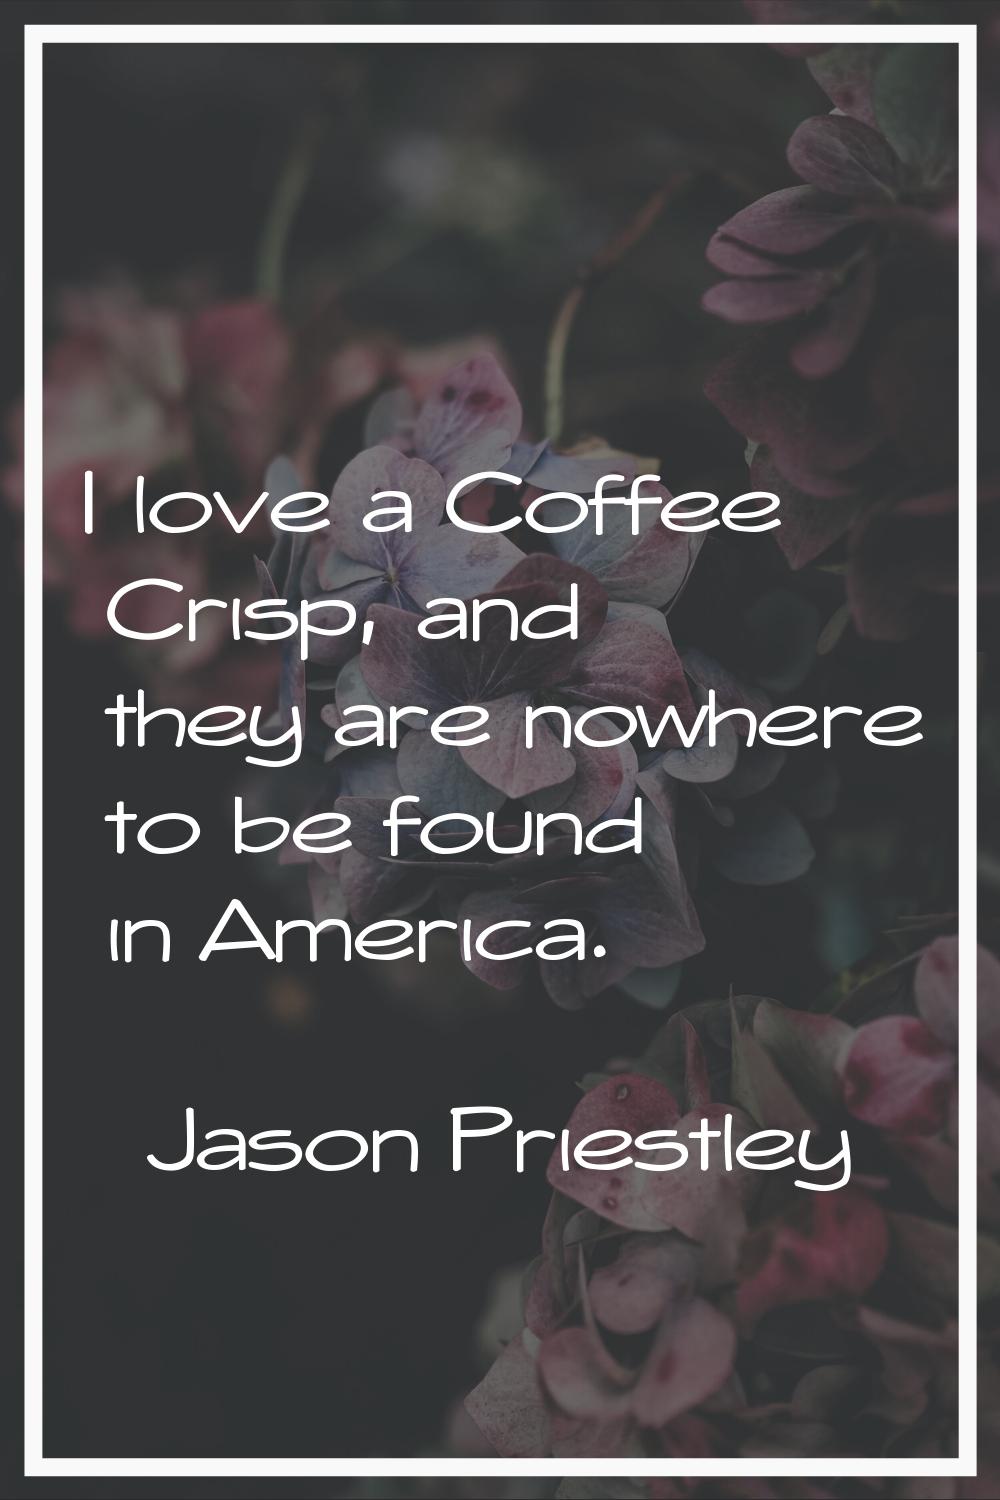 I love a Coffee Crisp, and they are nowhere to be found in America.